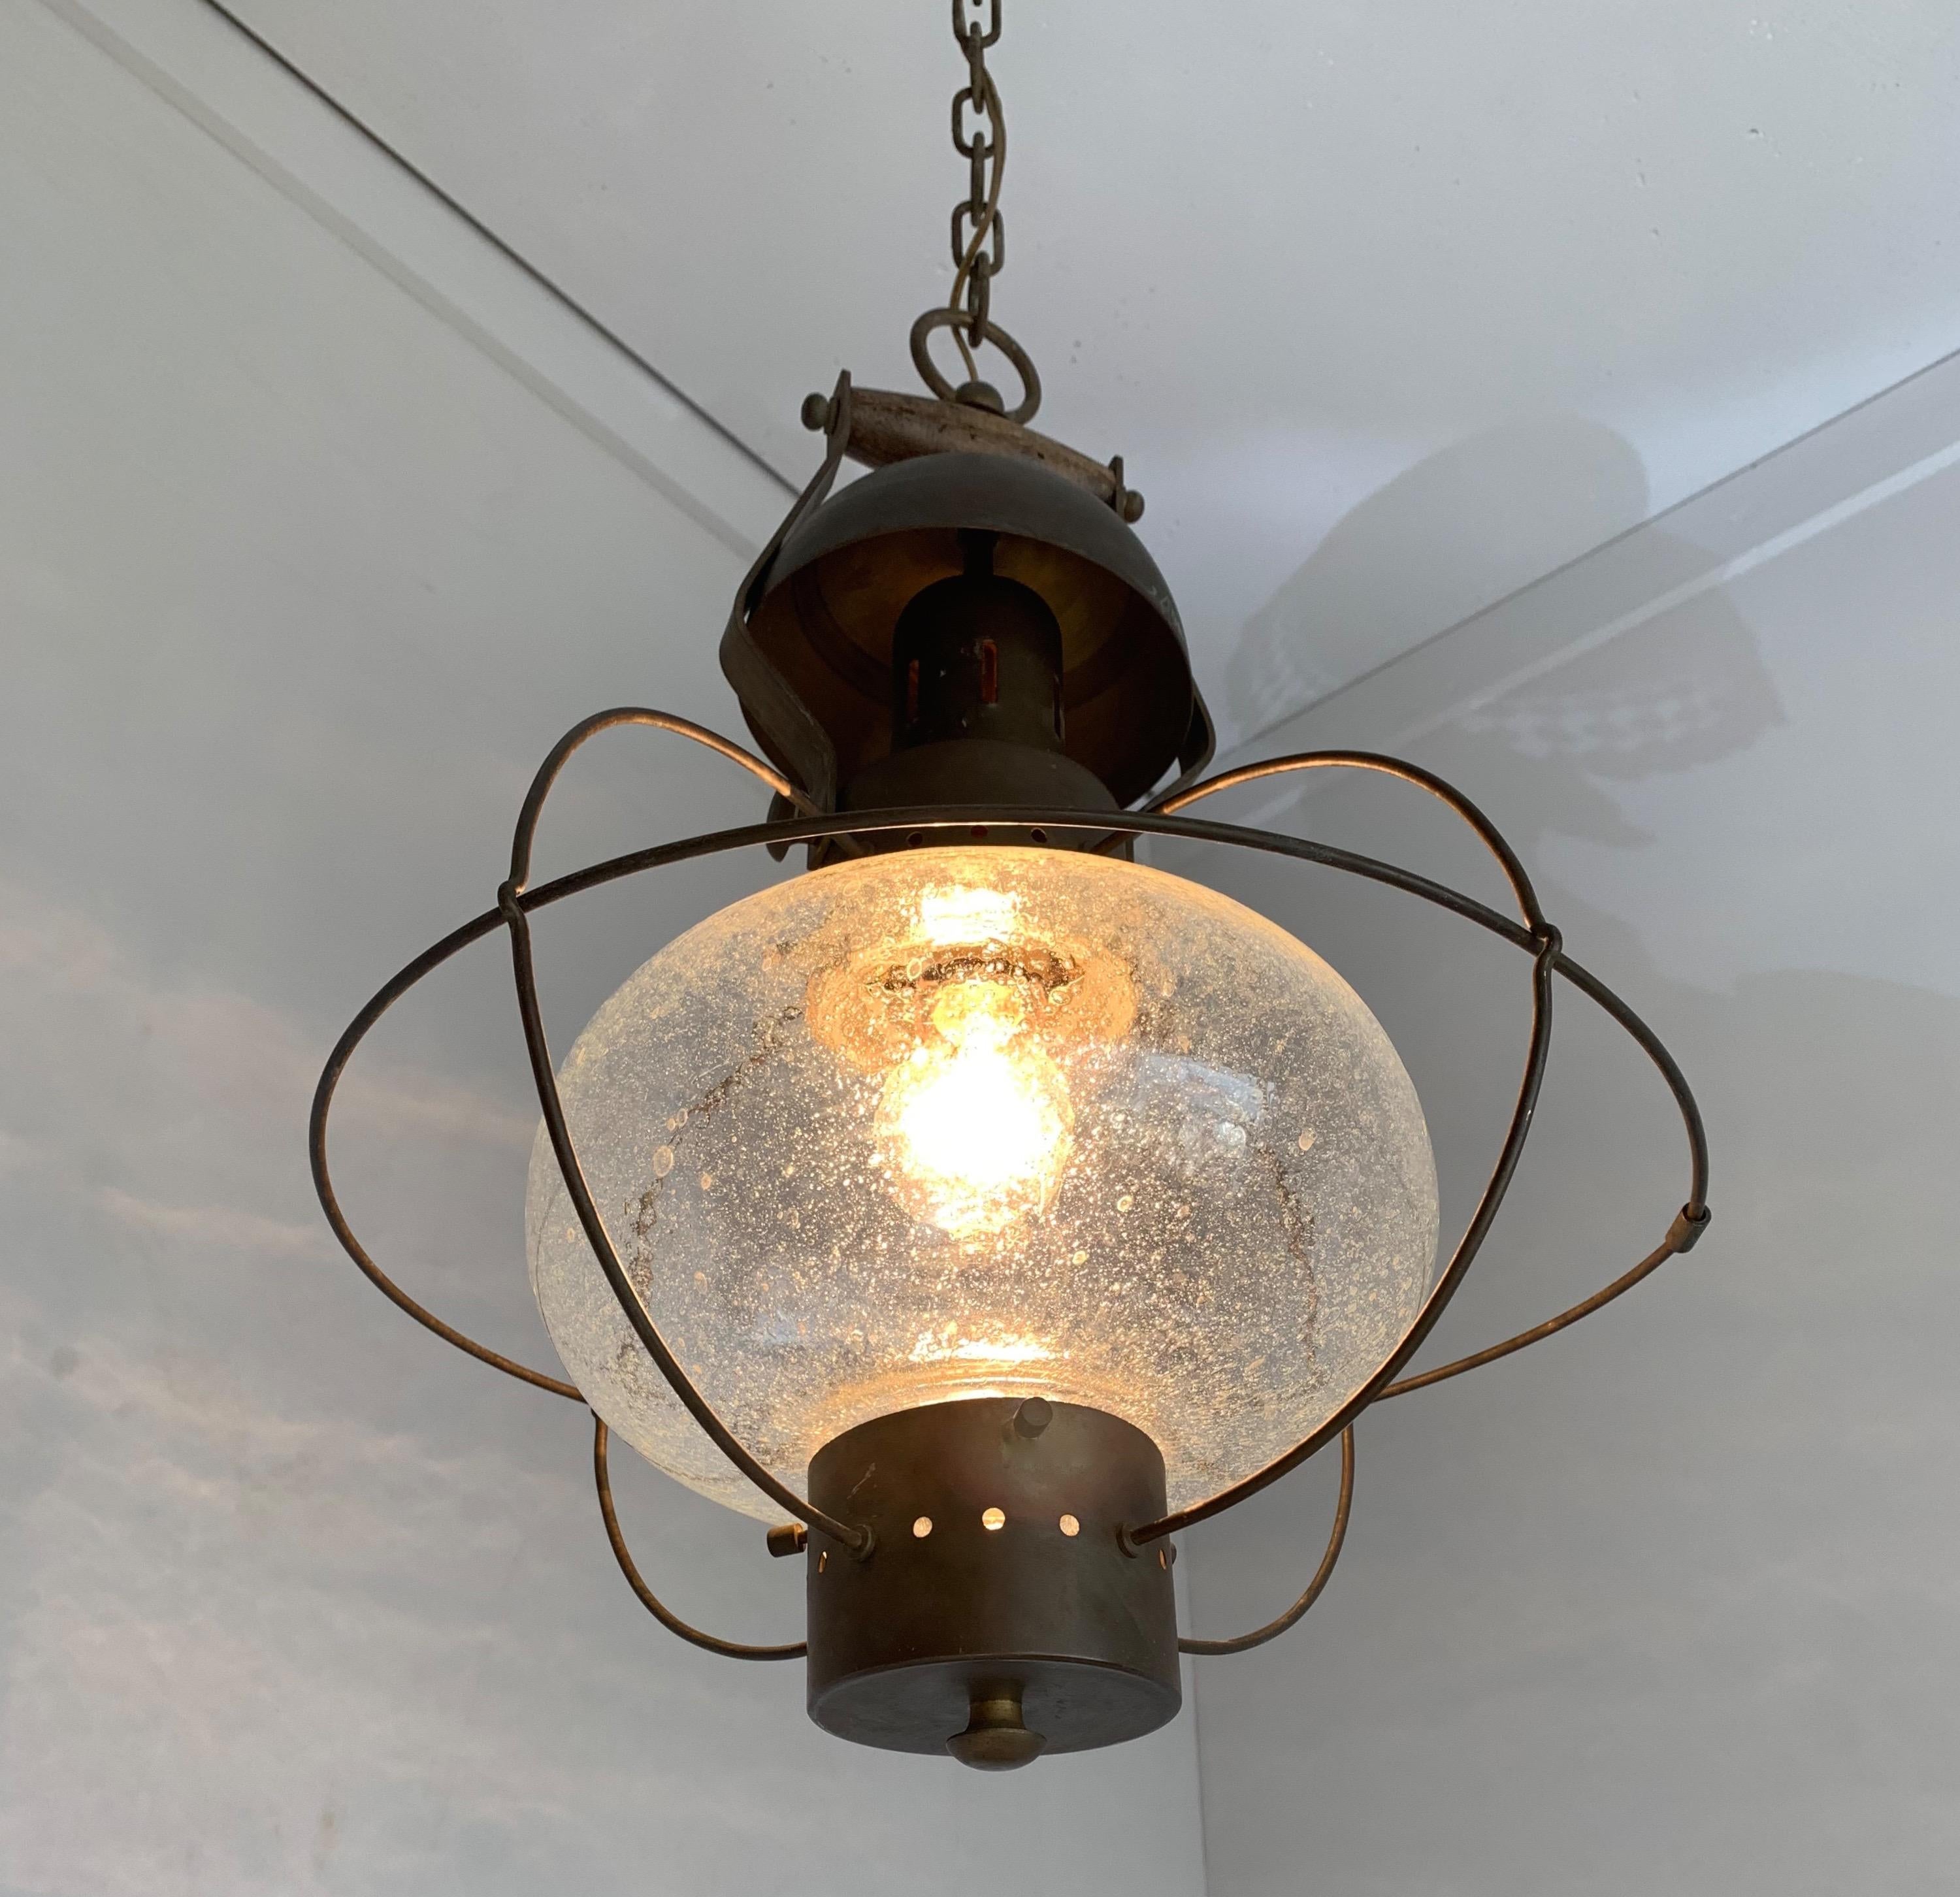 Great looking, 1950s design pendant.

If you are looking for a stylish and handcrafted midcentury chandelier then this rare design could be flying your way soon. The mouthblown glass shade inside the beautifully shaped and patinated brass frame is